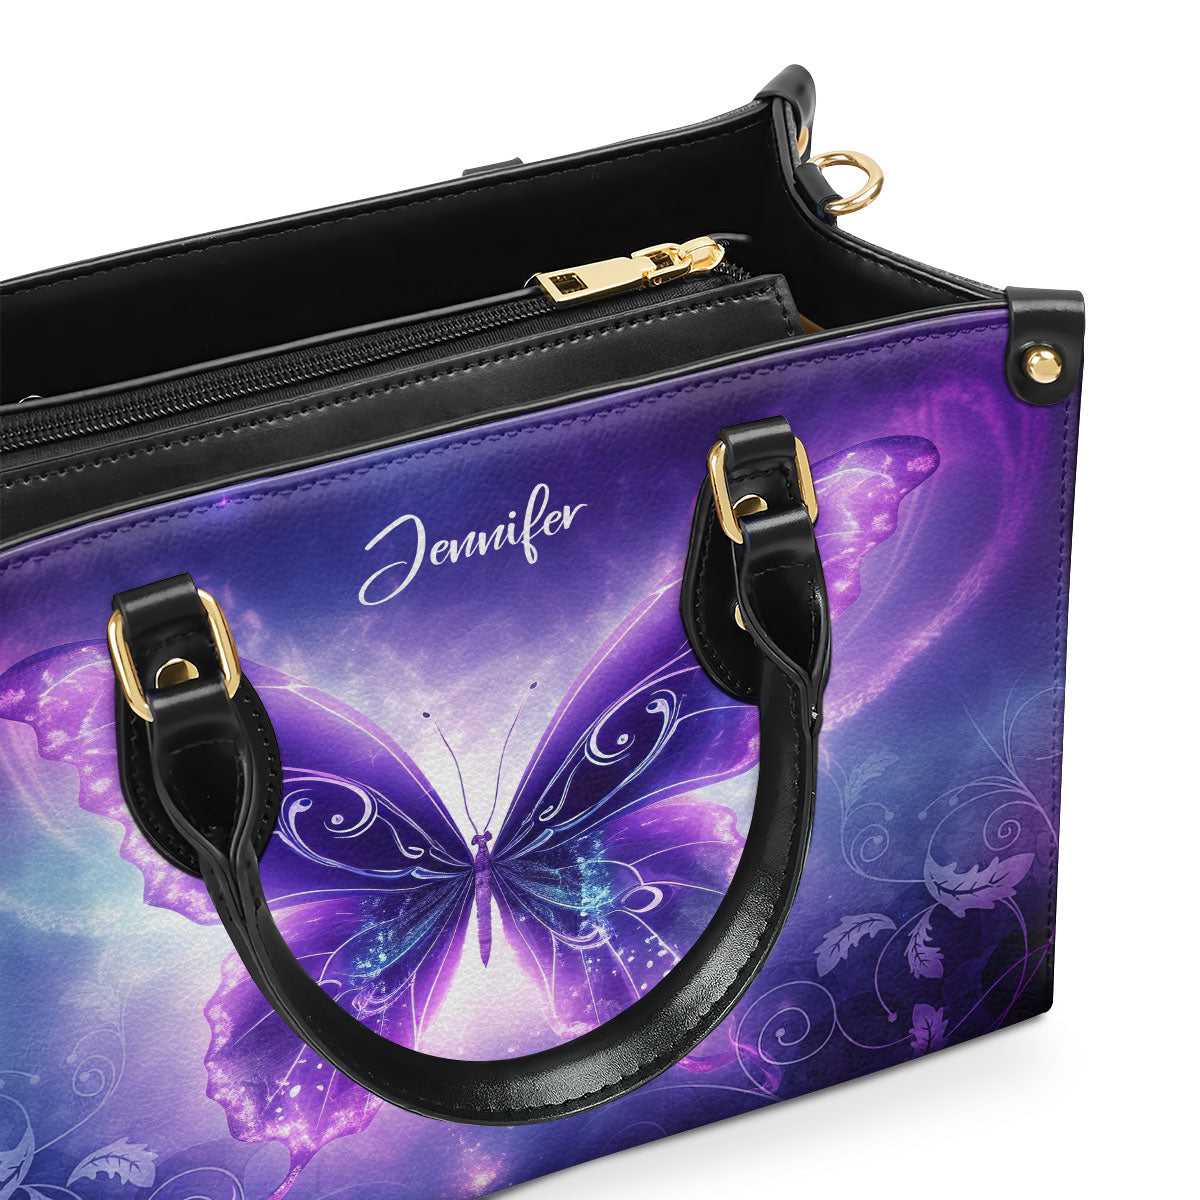 Butterfly - Personalized Leather Handbag MSM49